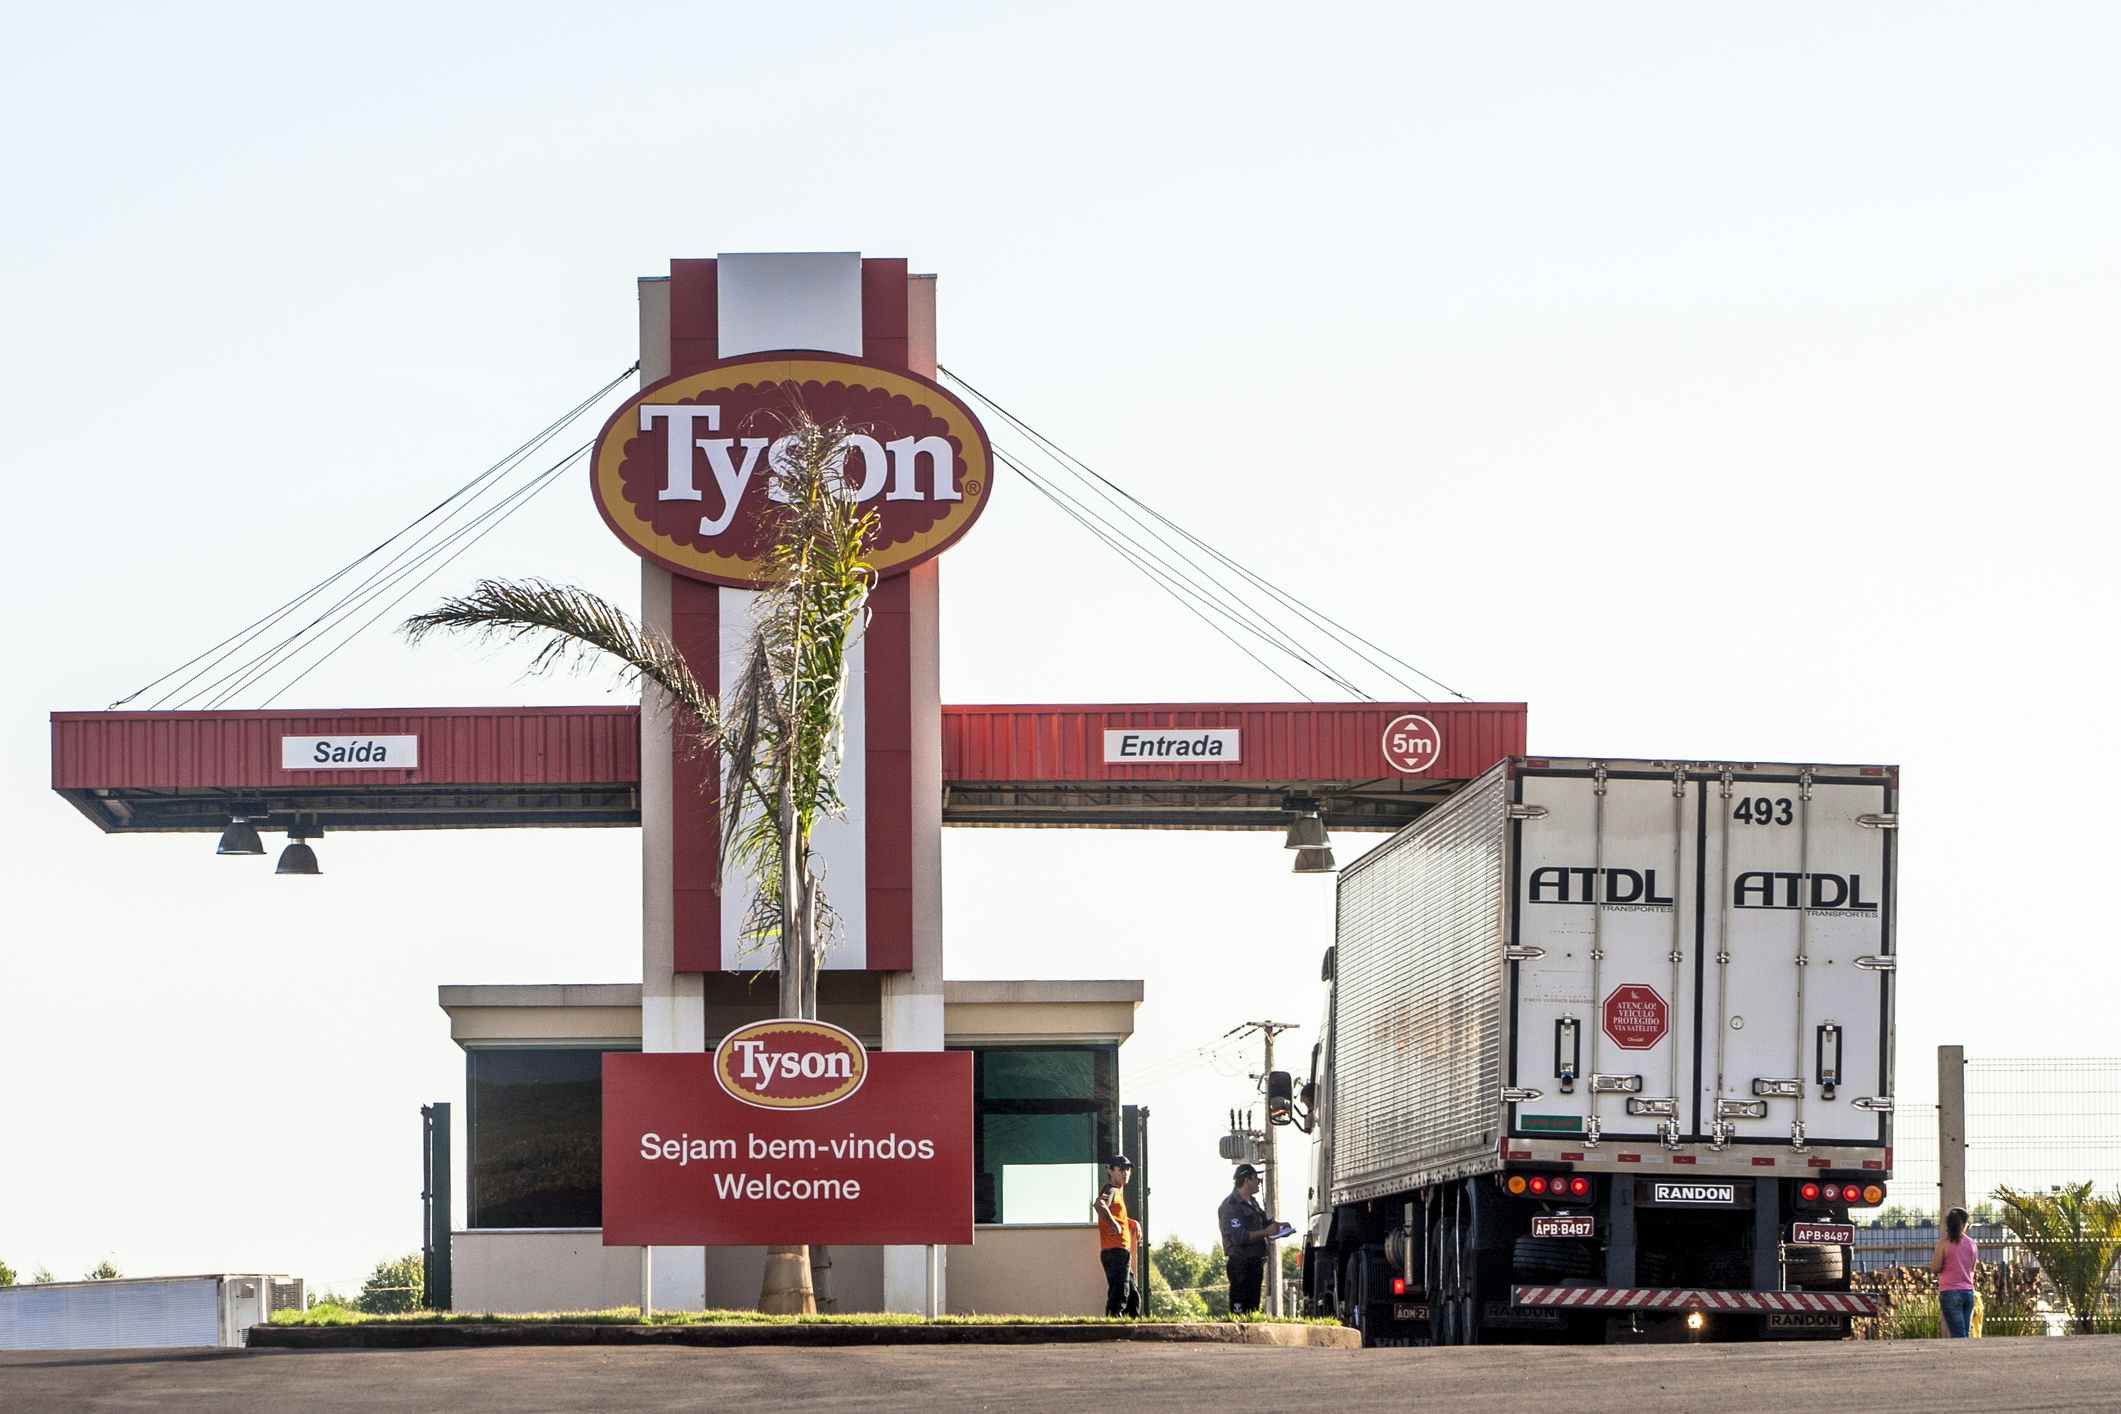 Entrance of Tyson meat processing plant